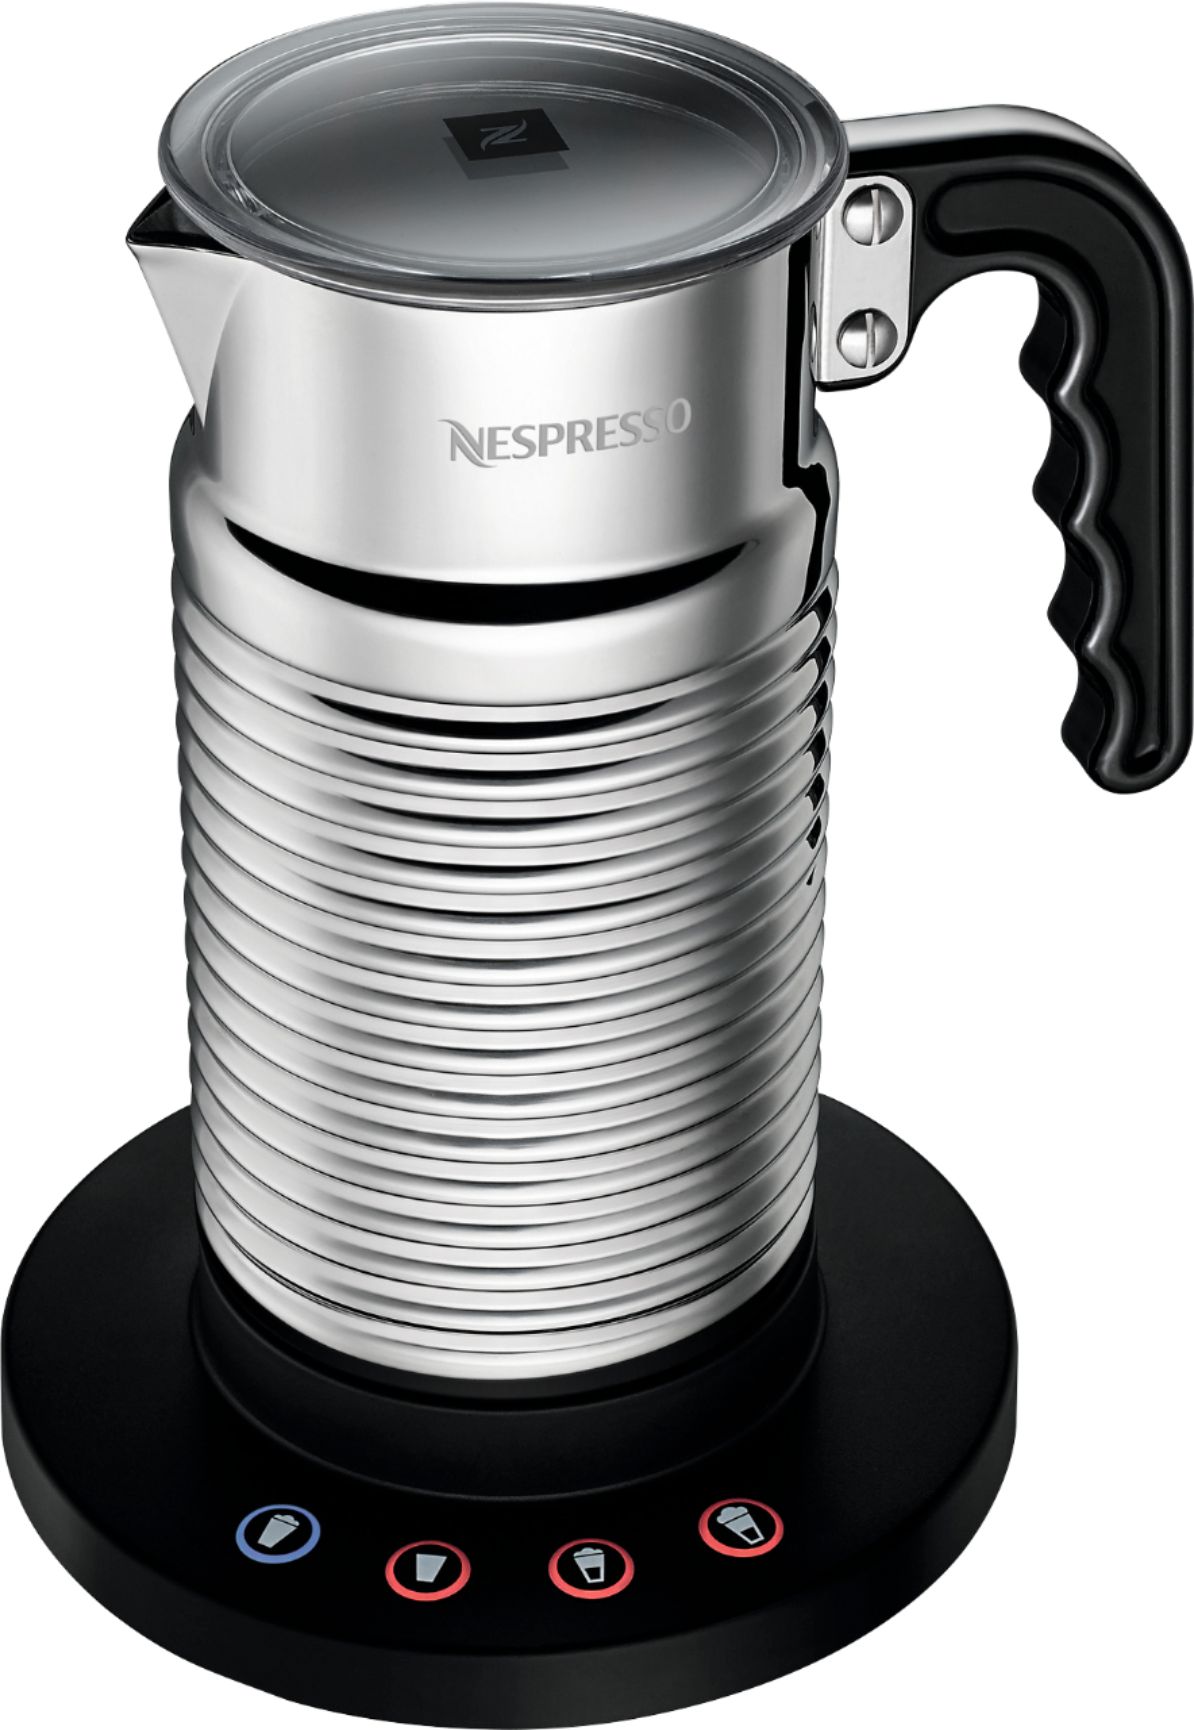 Chrome for sale online Nespresso 3192-US Aeroccino Plus Milk Frother Heating